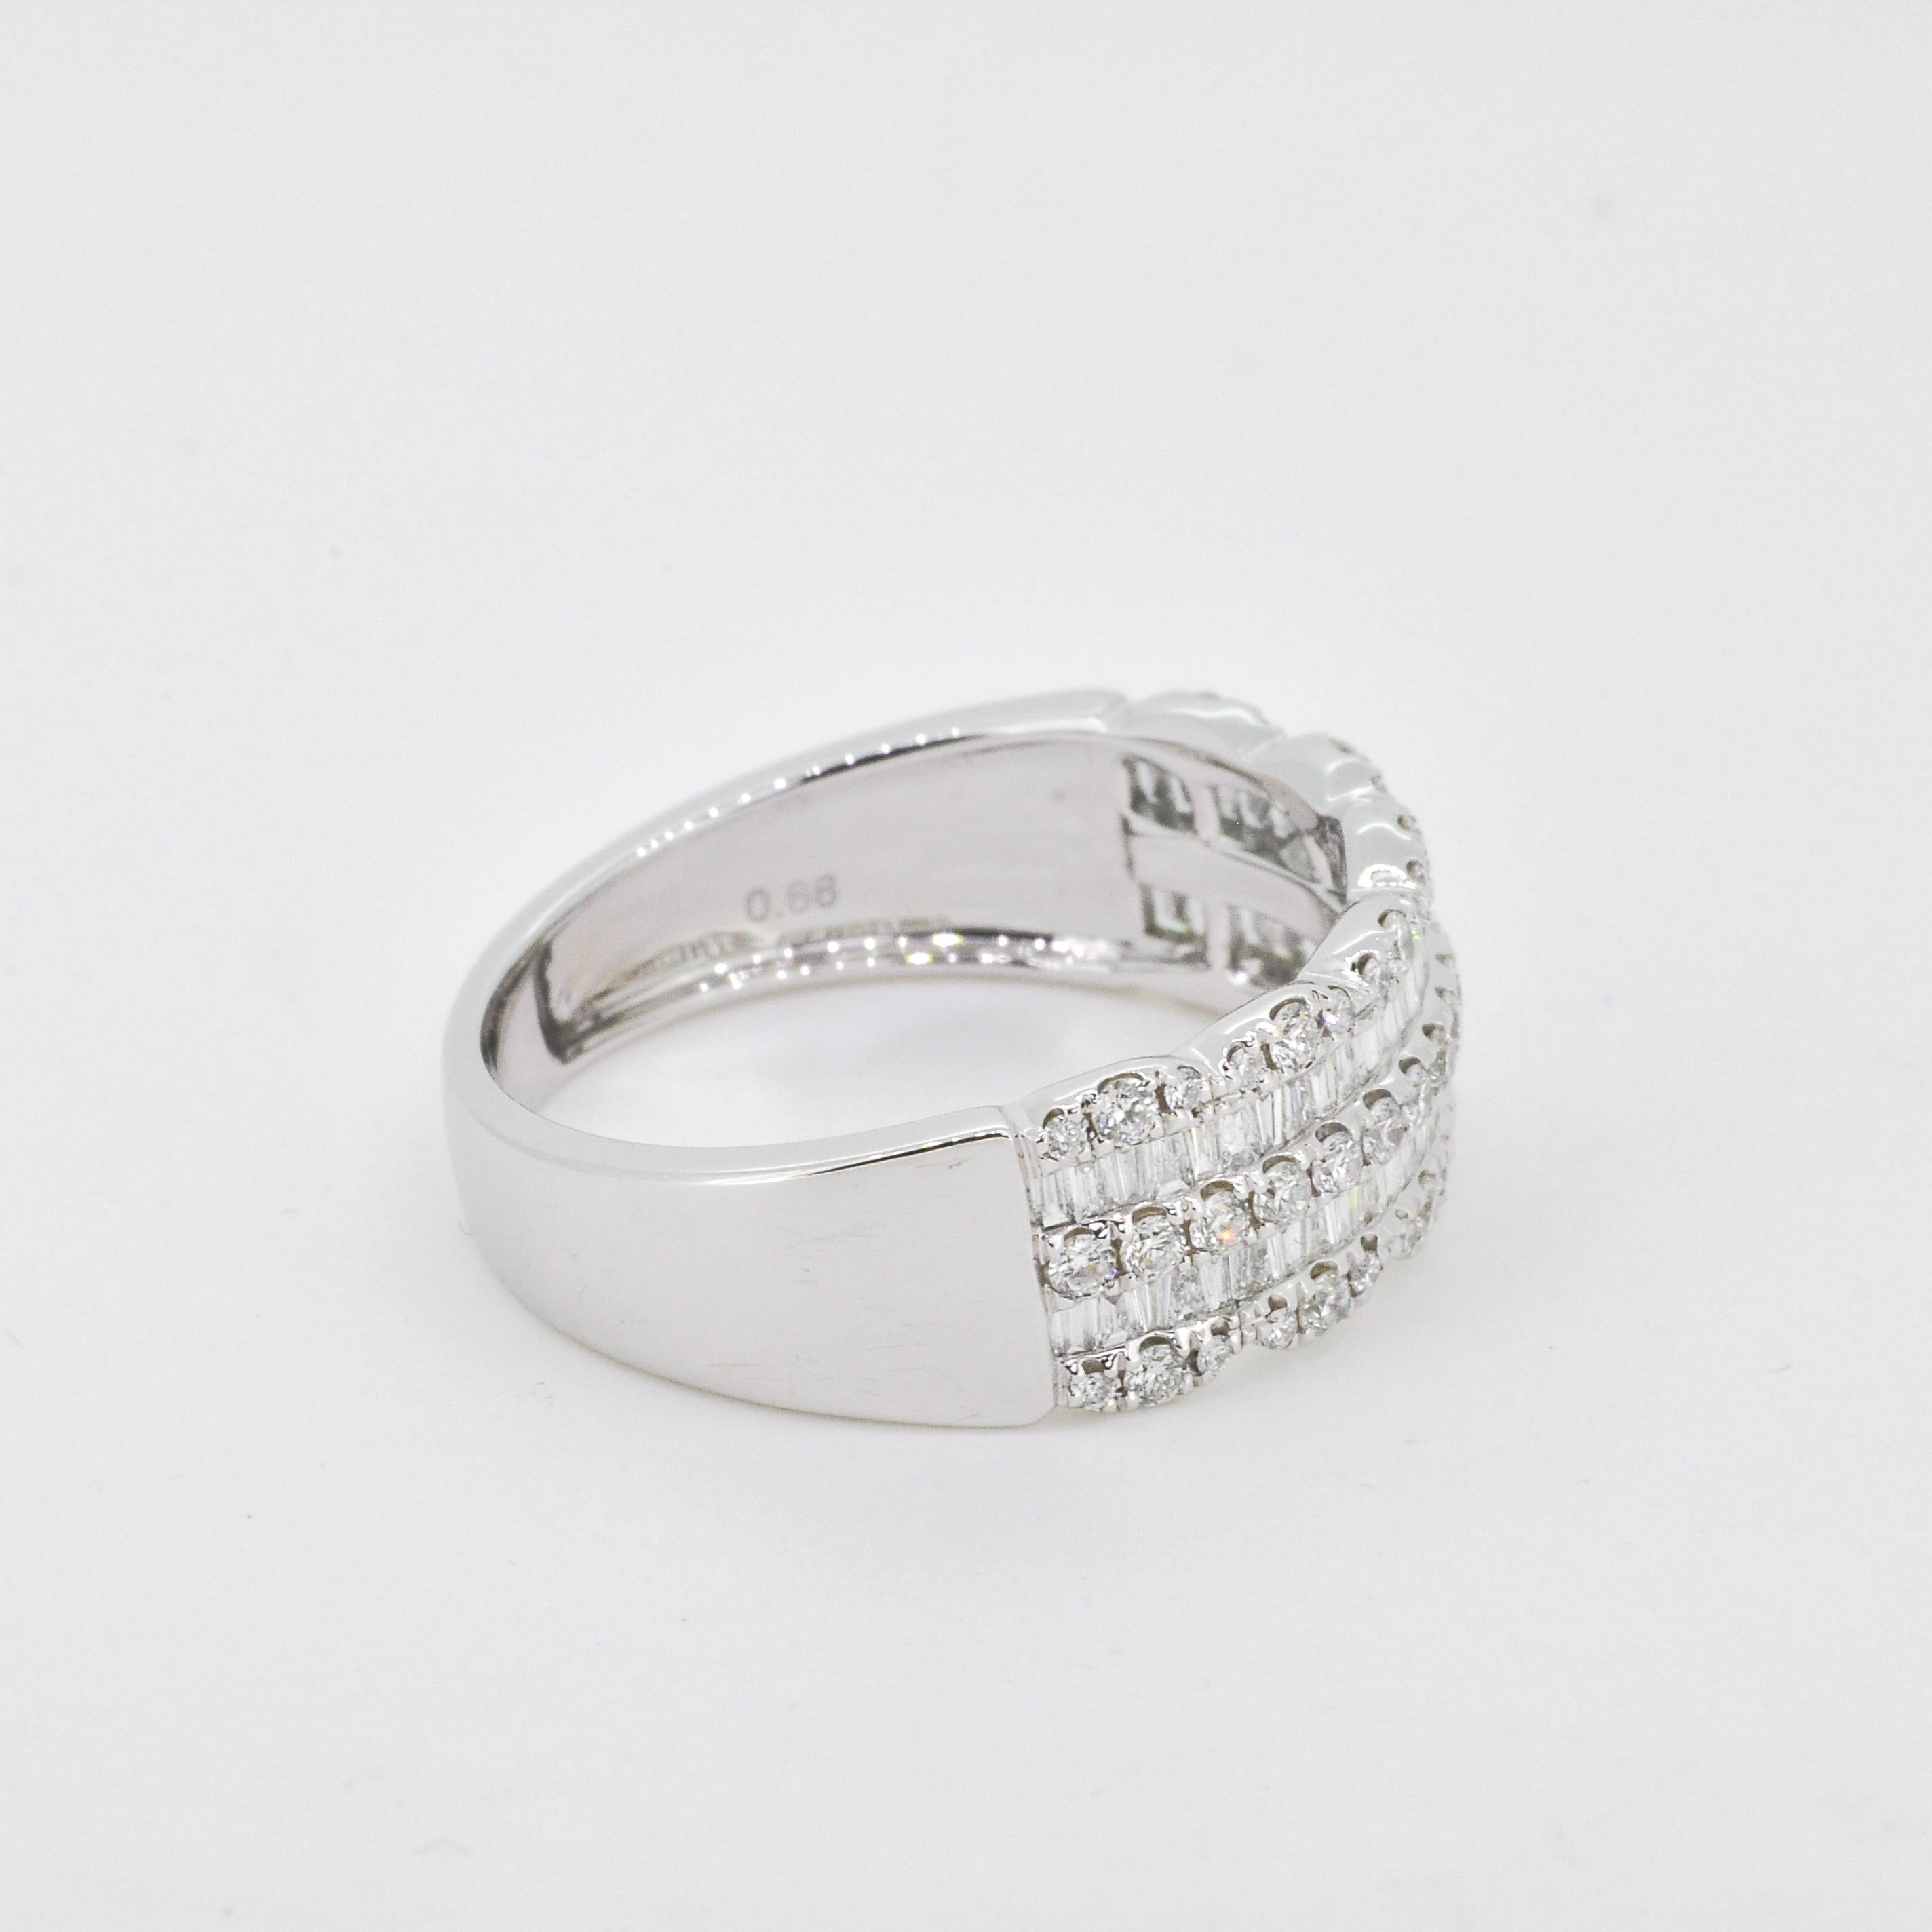 Baguette Cut Natural Diamond Ring 0.76 carat 18KT White Gold Cocktail Half Eternity Ring Band